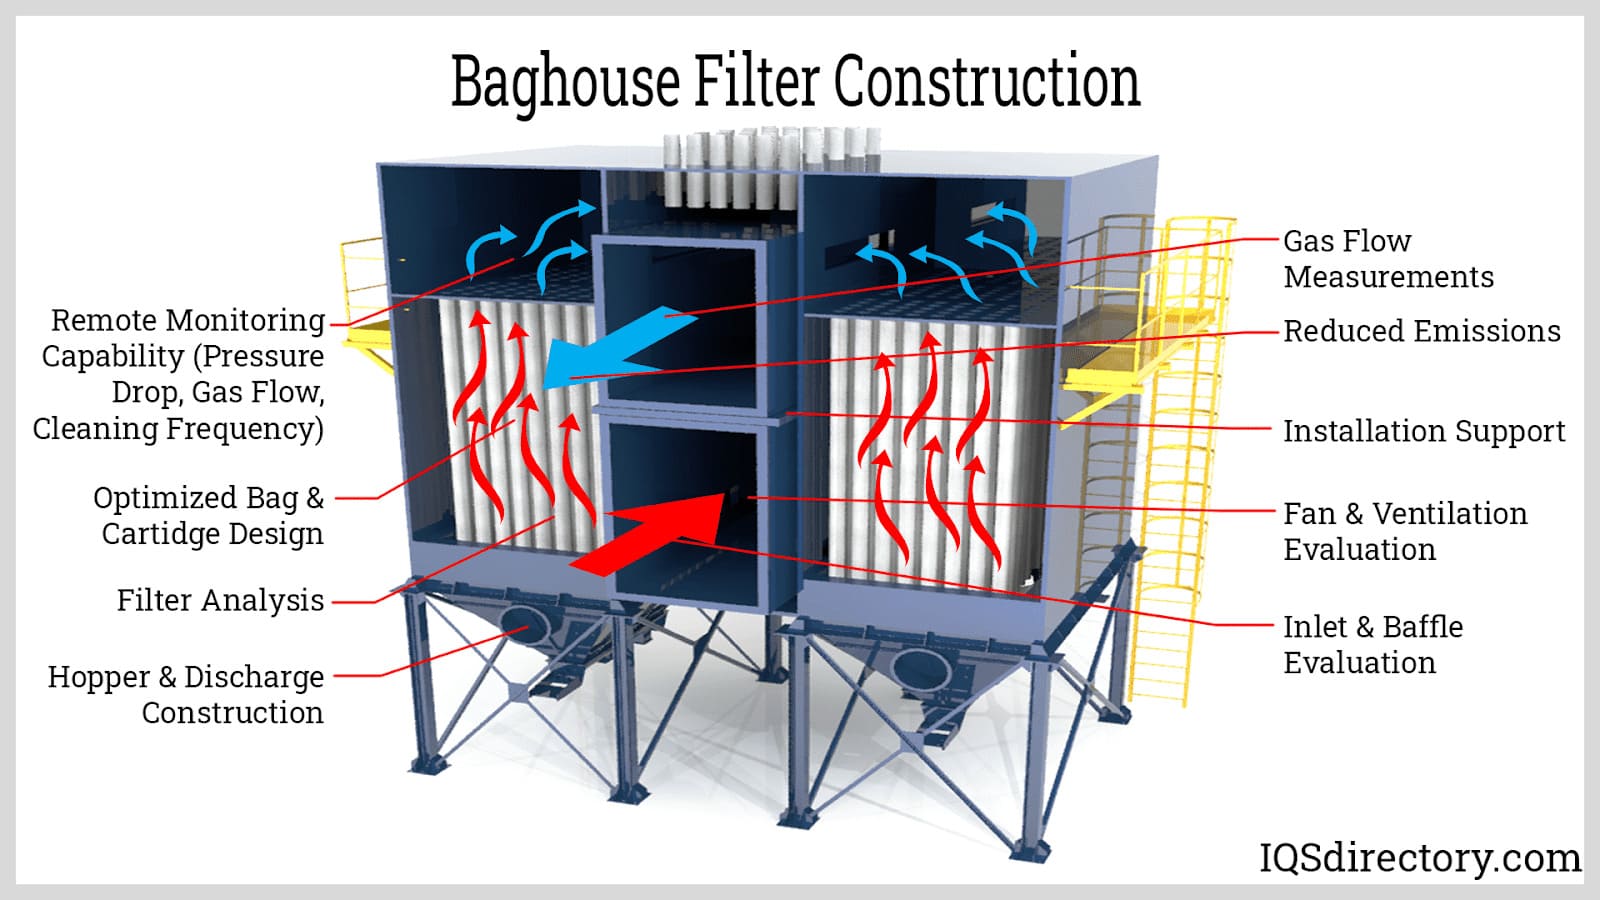 Baghouse Filter Construction